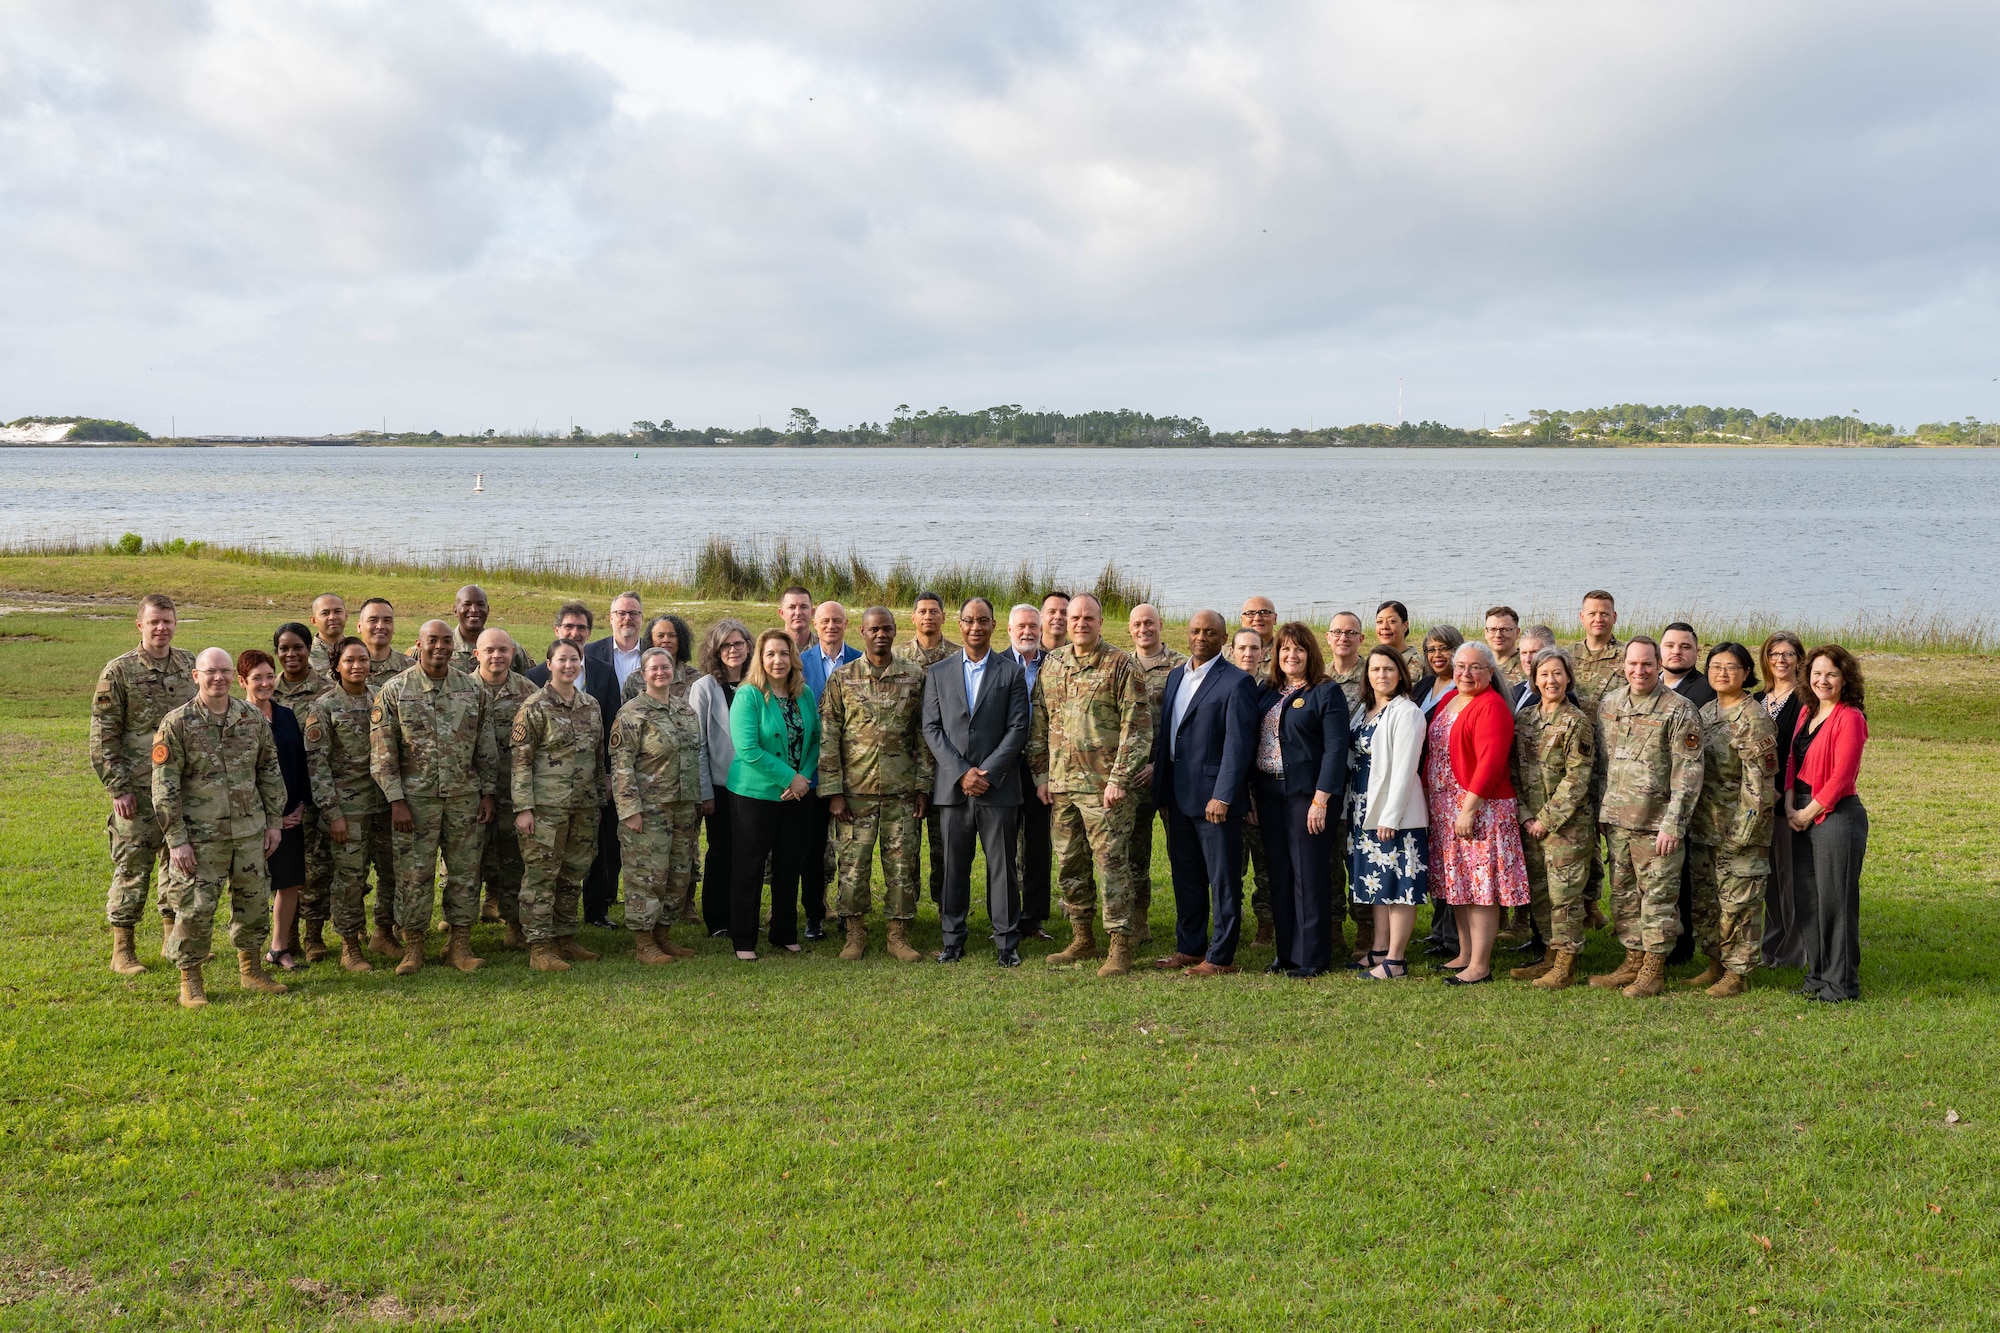 Carlos Rodgers, the Principal Deputy Assistant Secretary for Financial Management and Comptroller, met with base leaders and senior leaders from across the Financial Management community at Hurlburt Field, Fla., April 5, 2023. The executive session participants discussed the strategic issues and priorities impacting the financial management career field and the Department of the Air Force. (U.S. Air Force photo by Airman 1st Class Alysa Knott)